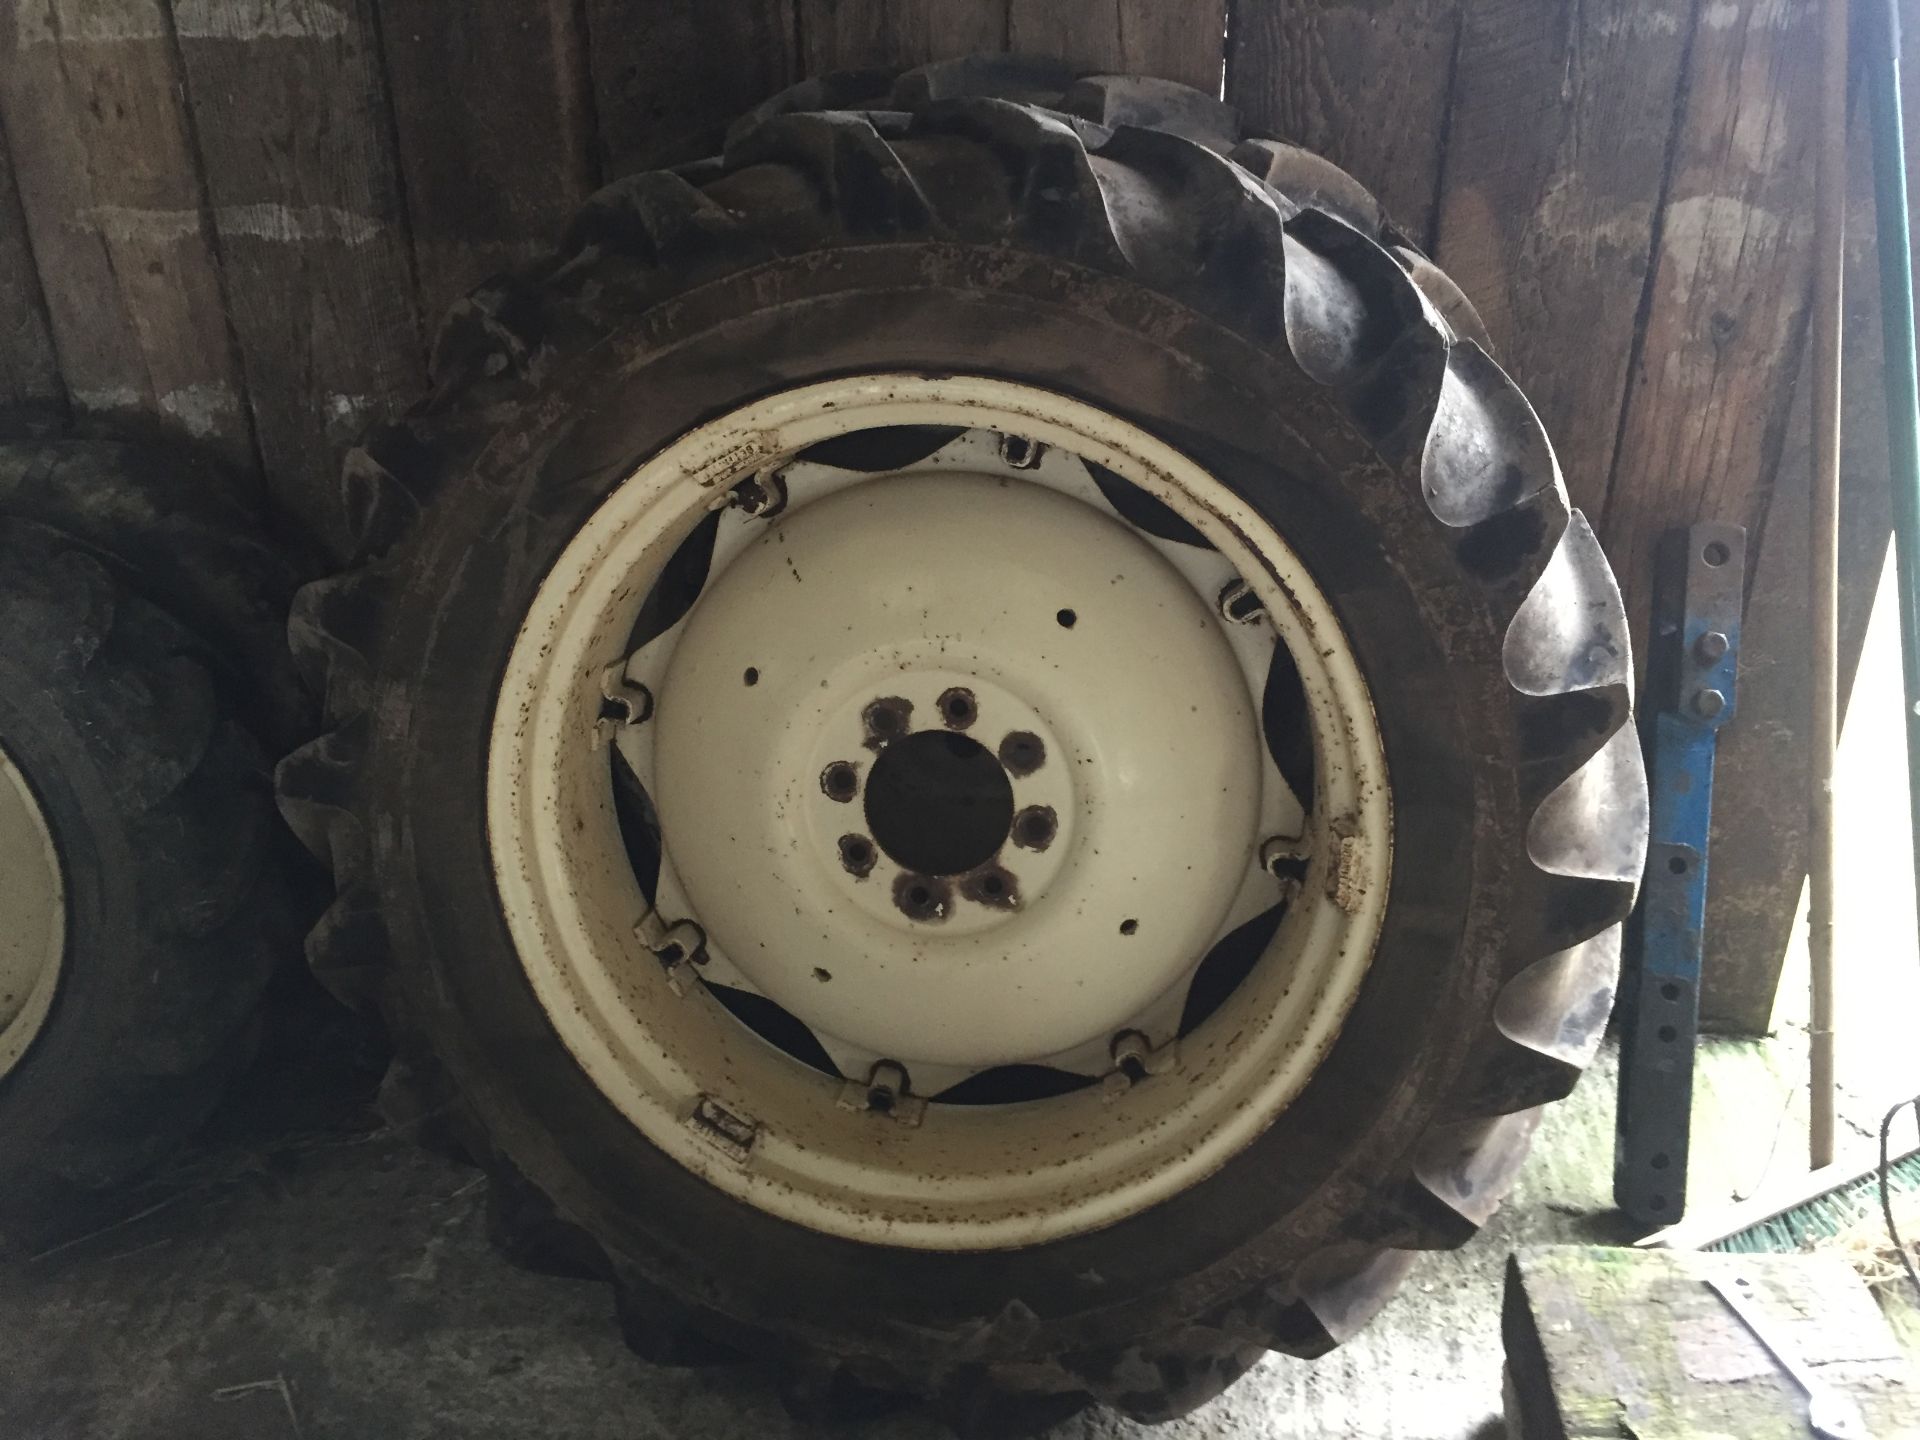 Morthurst Mould Dual Wheels 12.4 / 11-32 x 2. Location: Great Yarmouth, Norfolk.